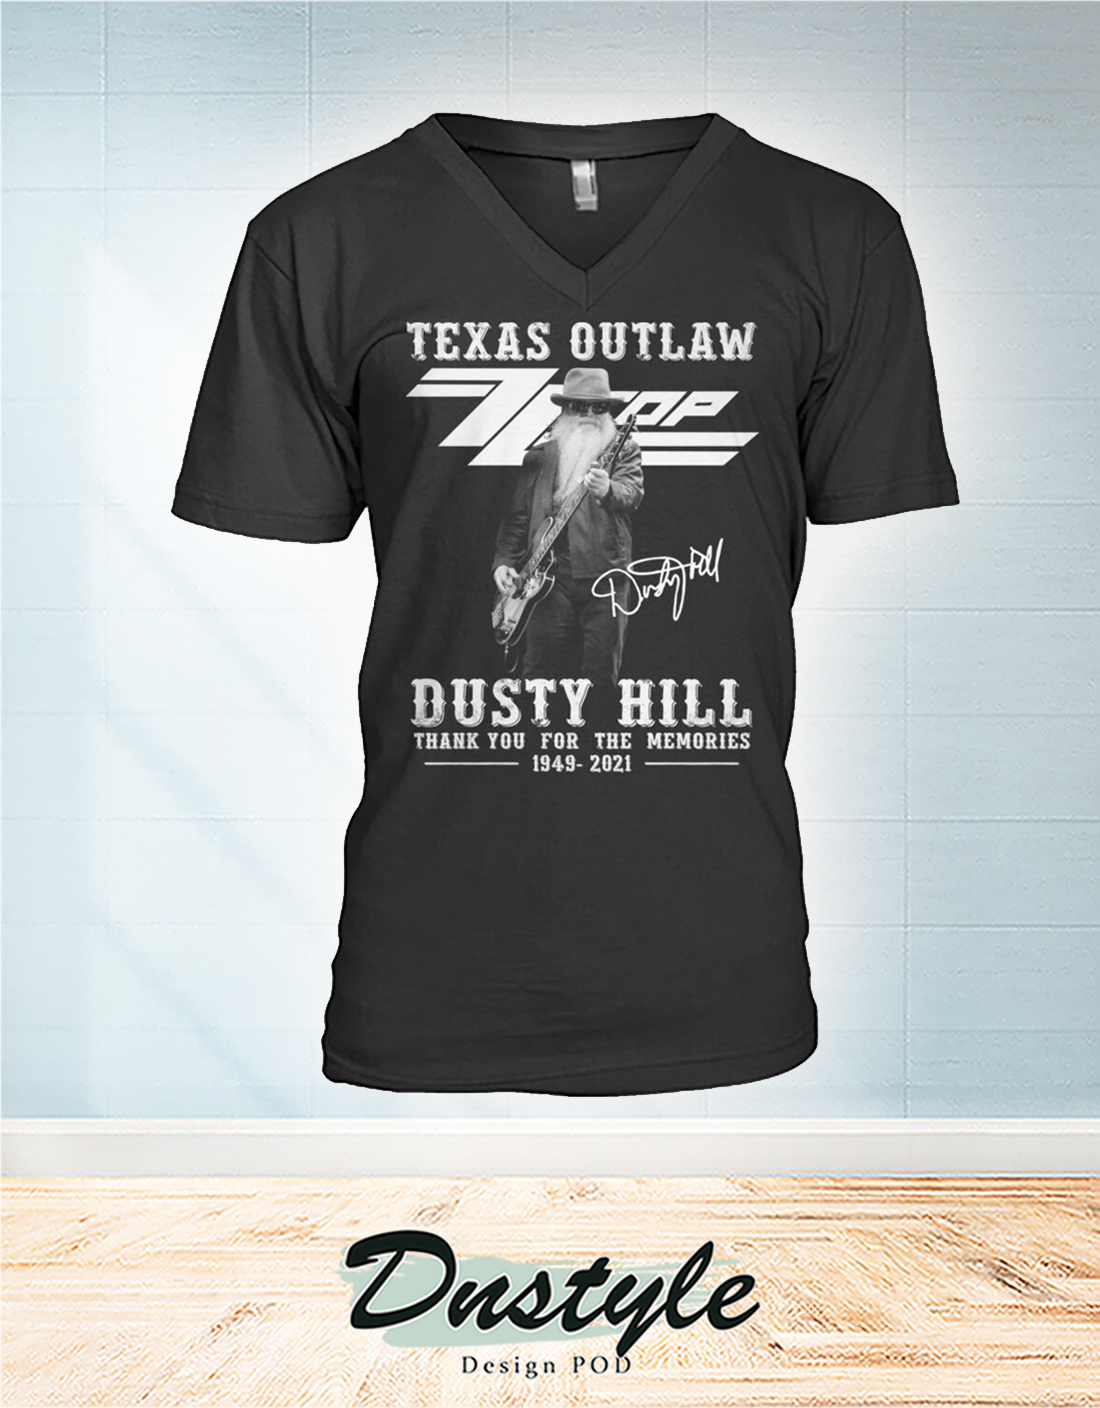 Texas outlaw ZZ Top dusty hill thank you for the memories v-neck